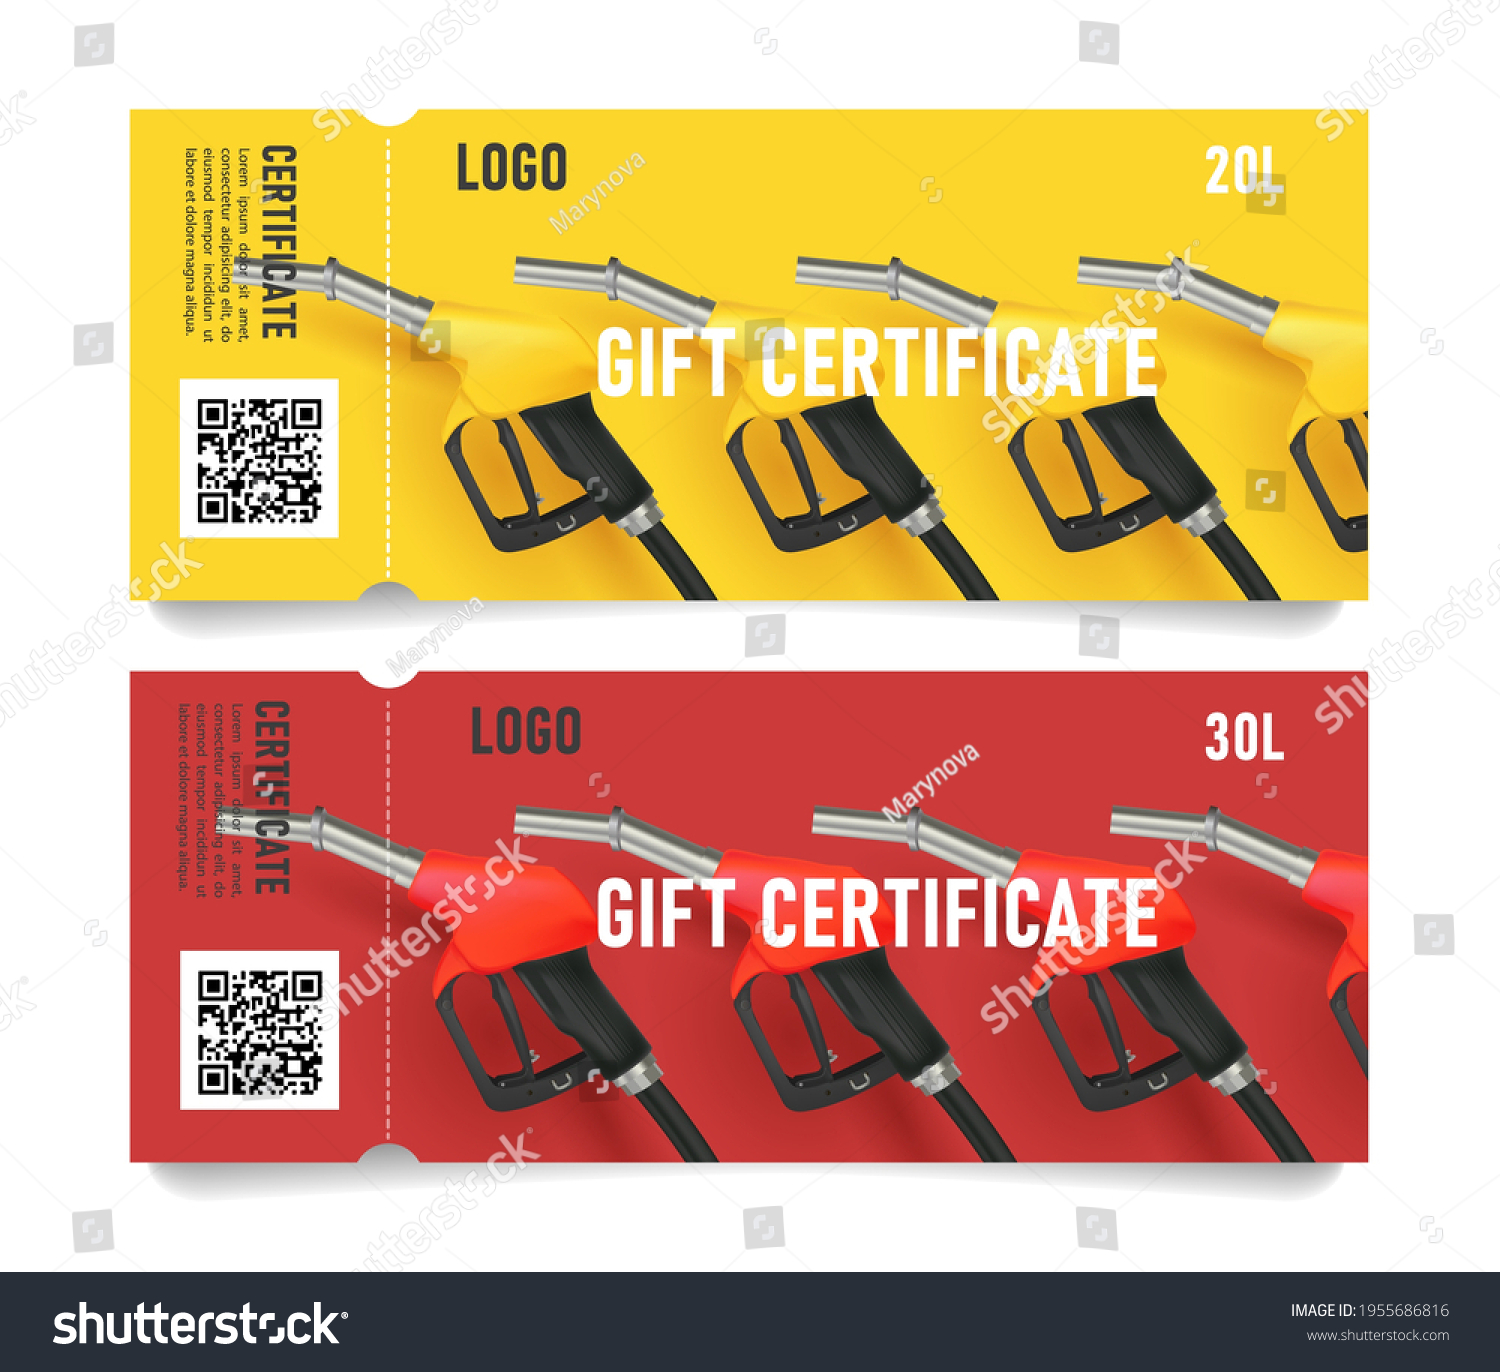 SVG of Set of cards with fuelling 3d nozzel illustration, modern gift certificate for gas station on bright yellow and red with same color refueling gadget and torn off part svg